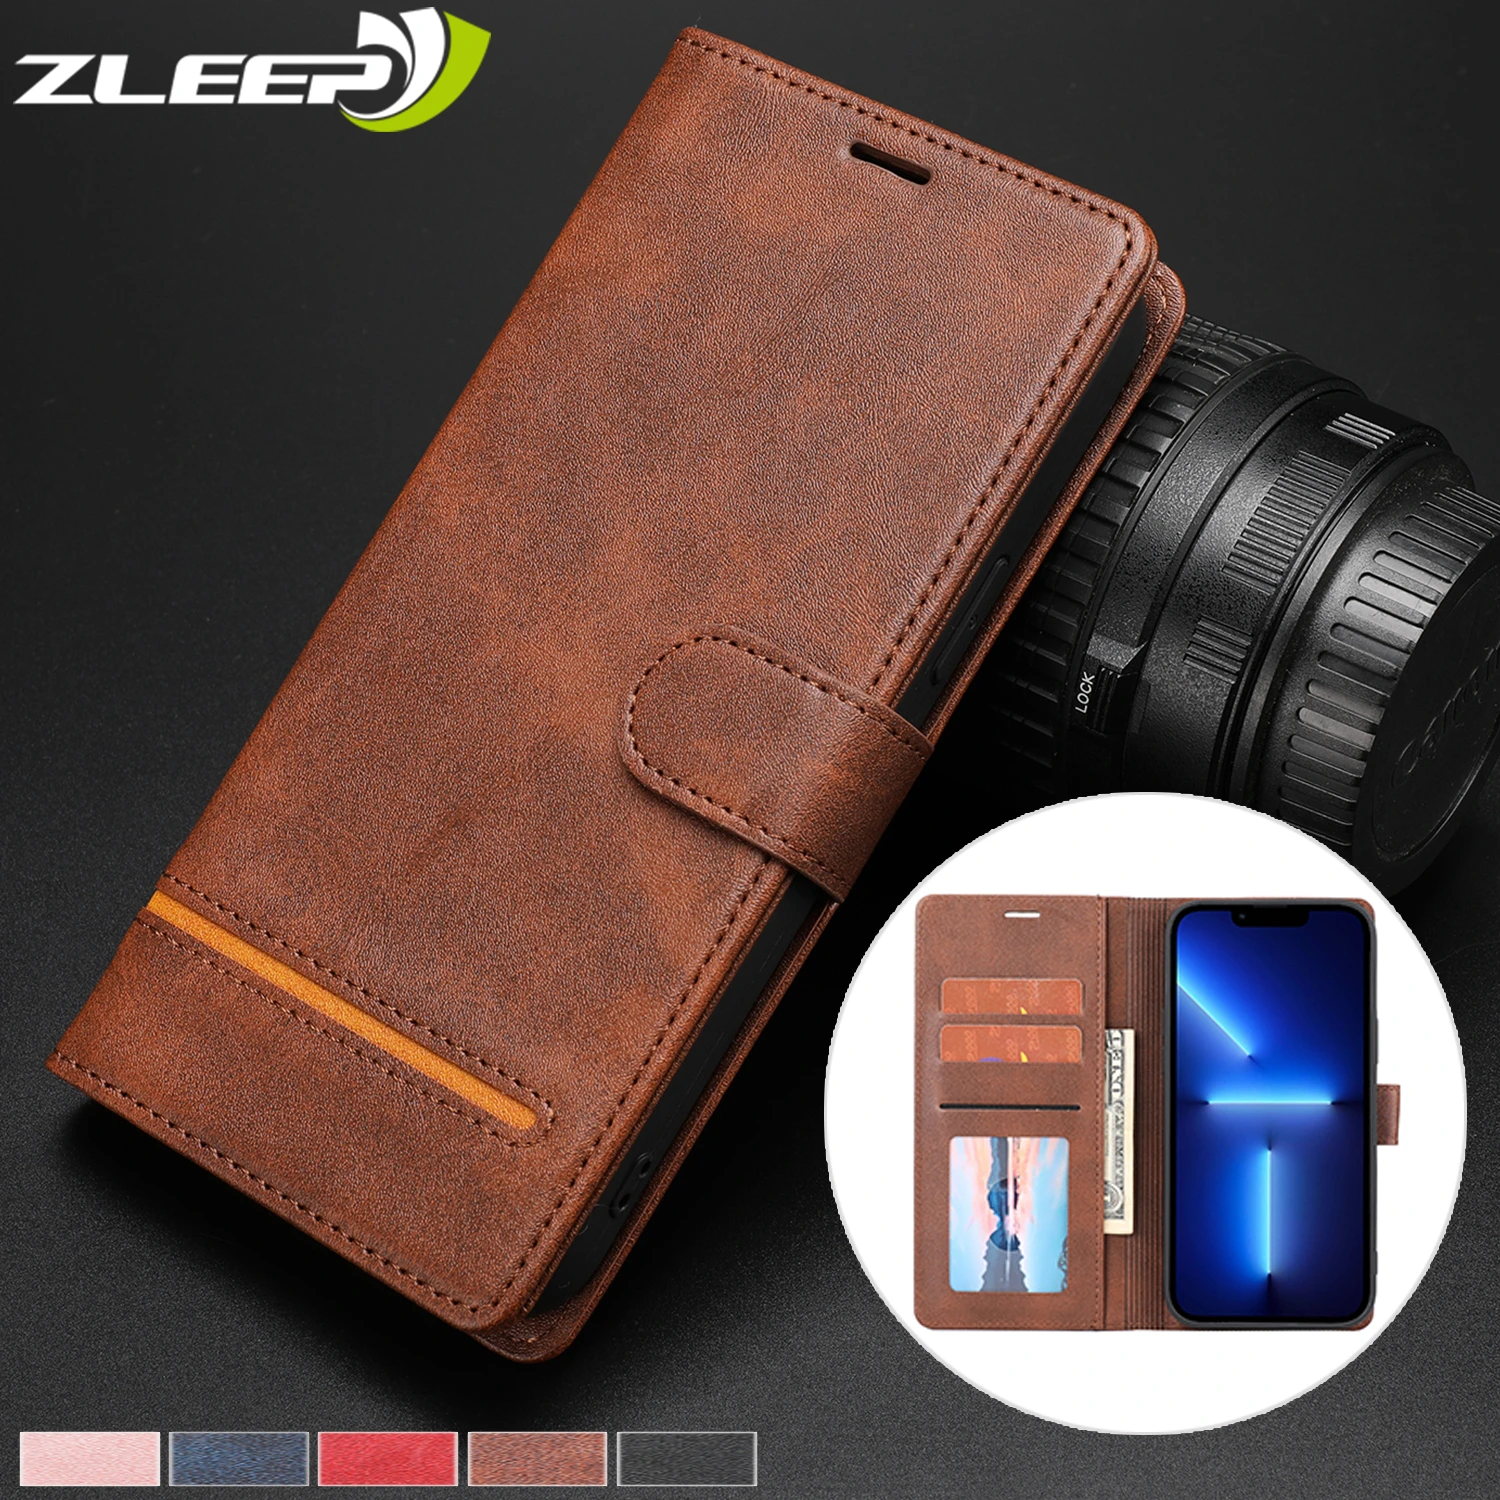 Magnetic Leather Phone Case For iPhone 13 12 Mini 11 Pro X XS Max XR 8 7 6 6S Plus SE 2020 PU Luxury Flip Wallet Card Slot Cover apple 13 pro max case